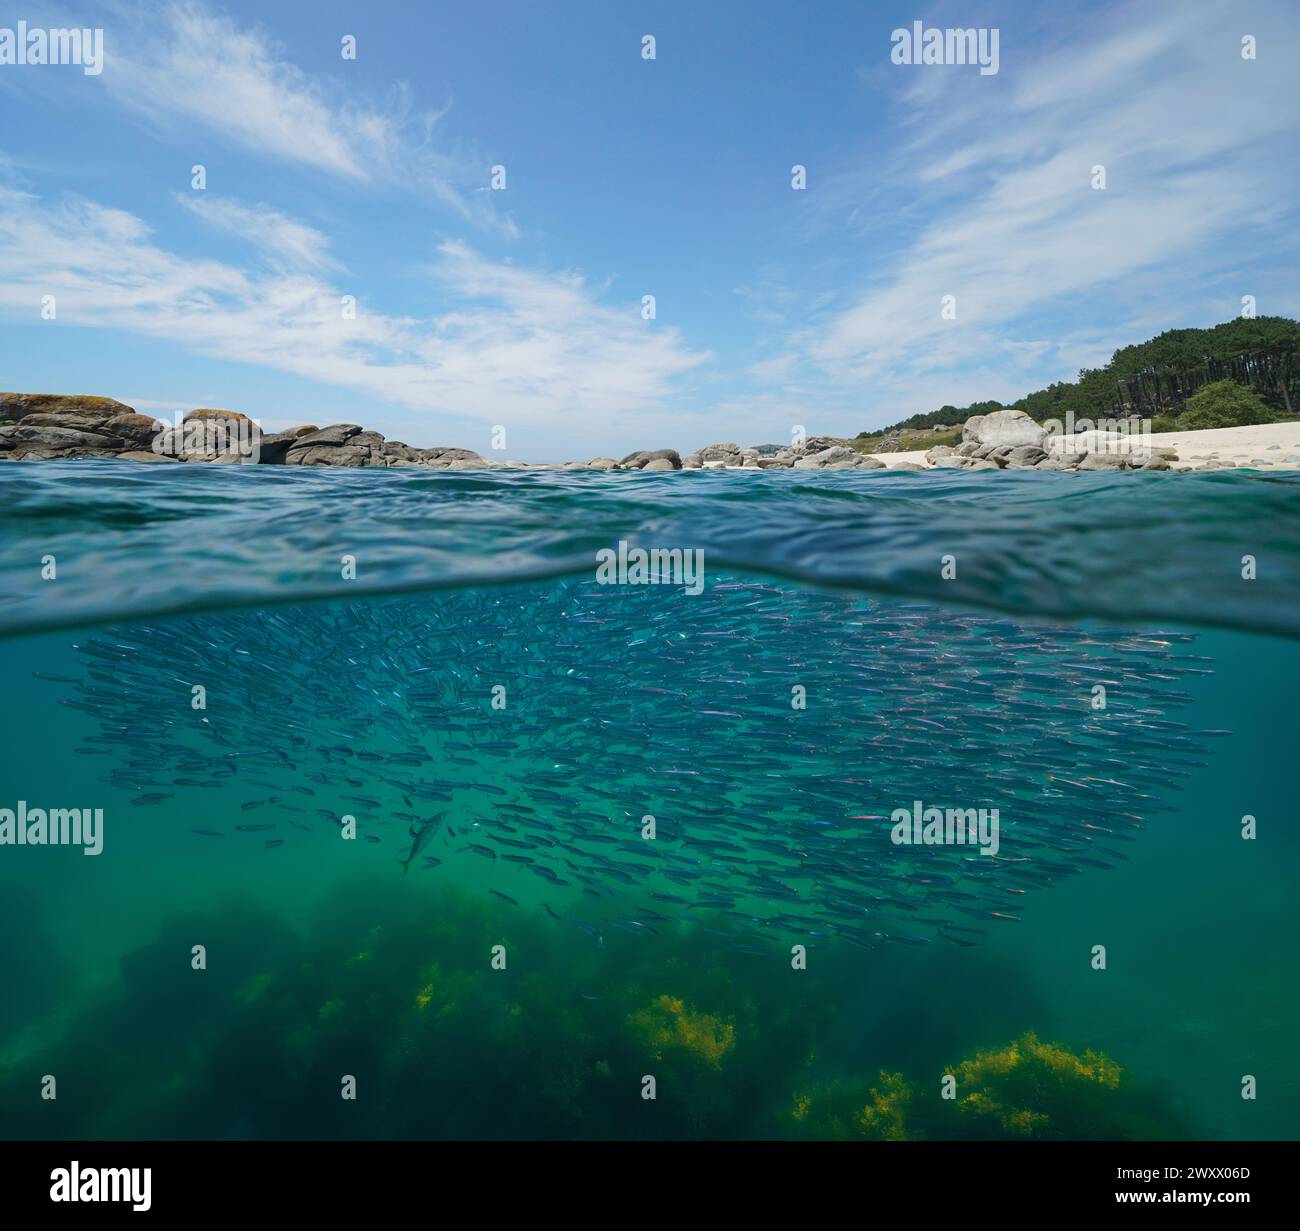 Coastline with anchovies fish underwater in the Atlantic ocean, Spain, split view half over and under water surface, natural scene, Galicia Stock Photo